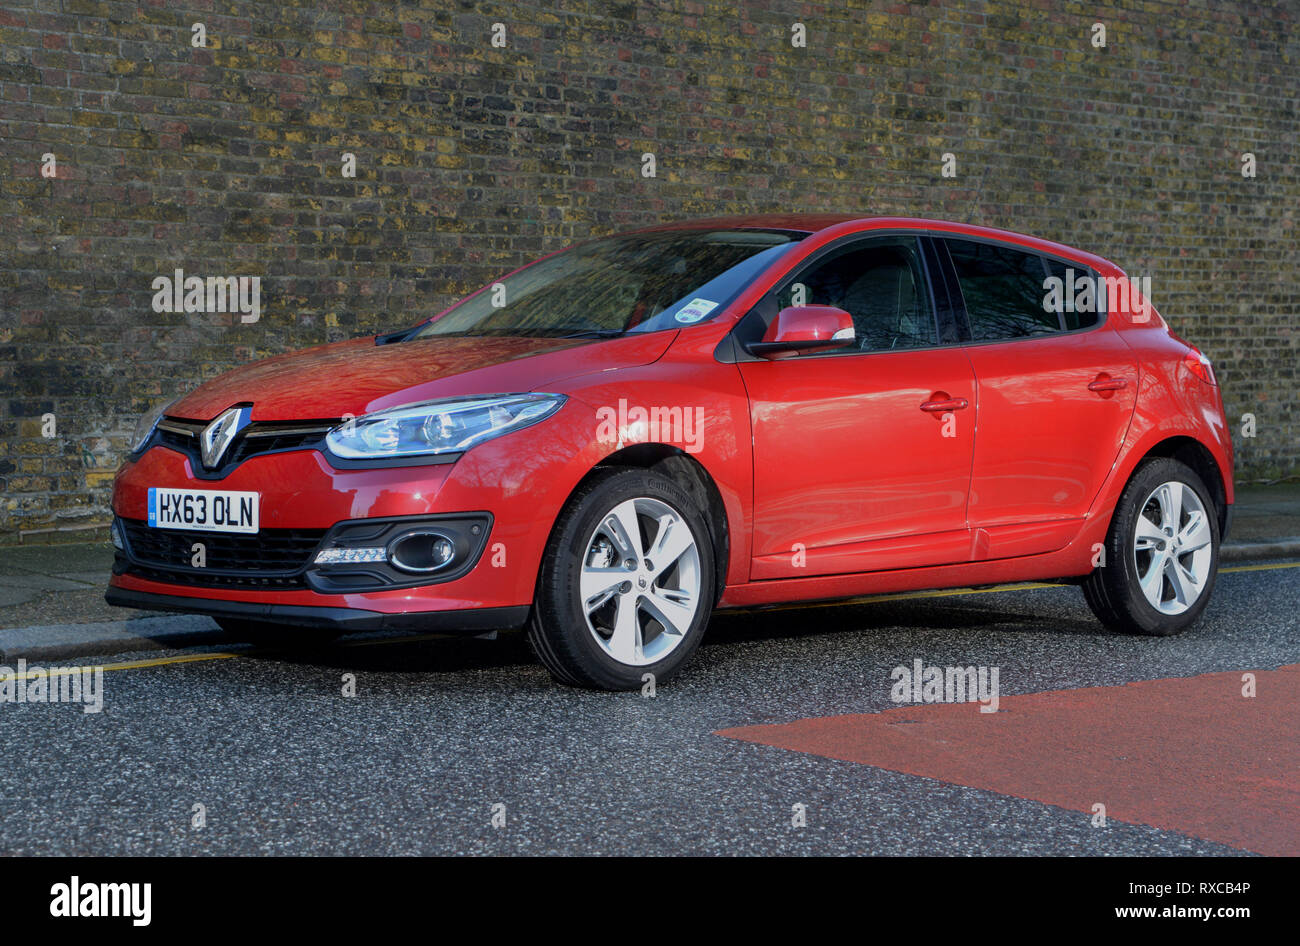 smog Ideaal rivier 2014 Renault Megane Coupe 1.5 diesel, C- segment mid size modern French car  Stock Photo - Alamy